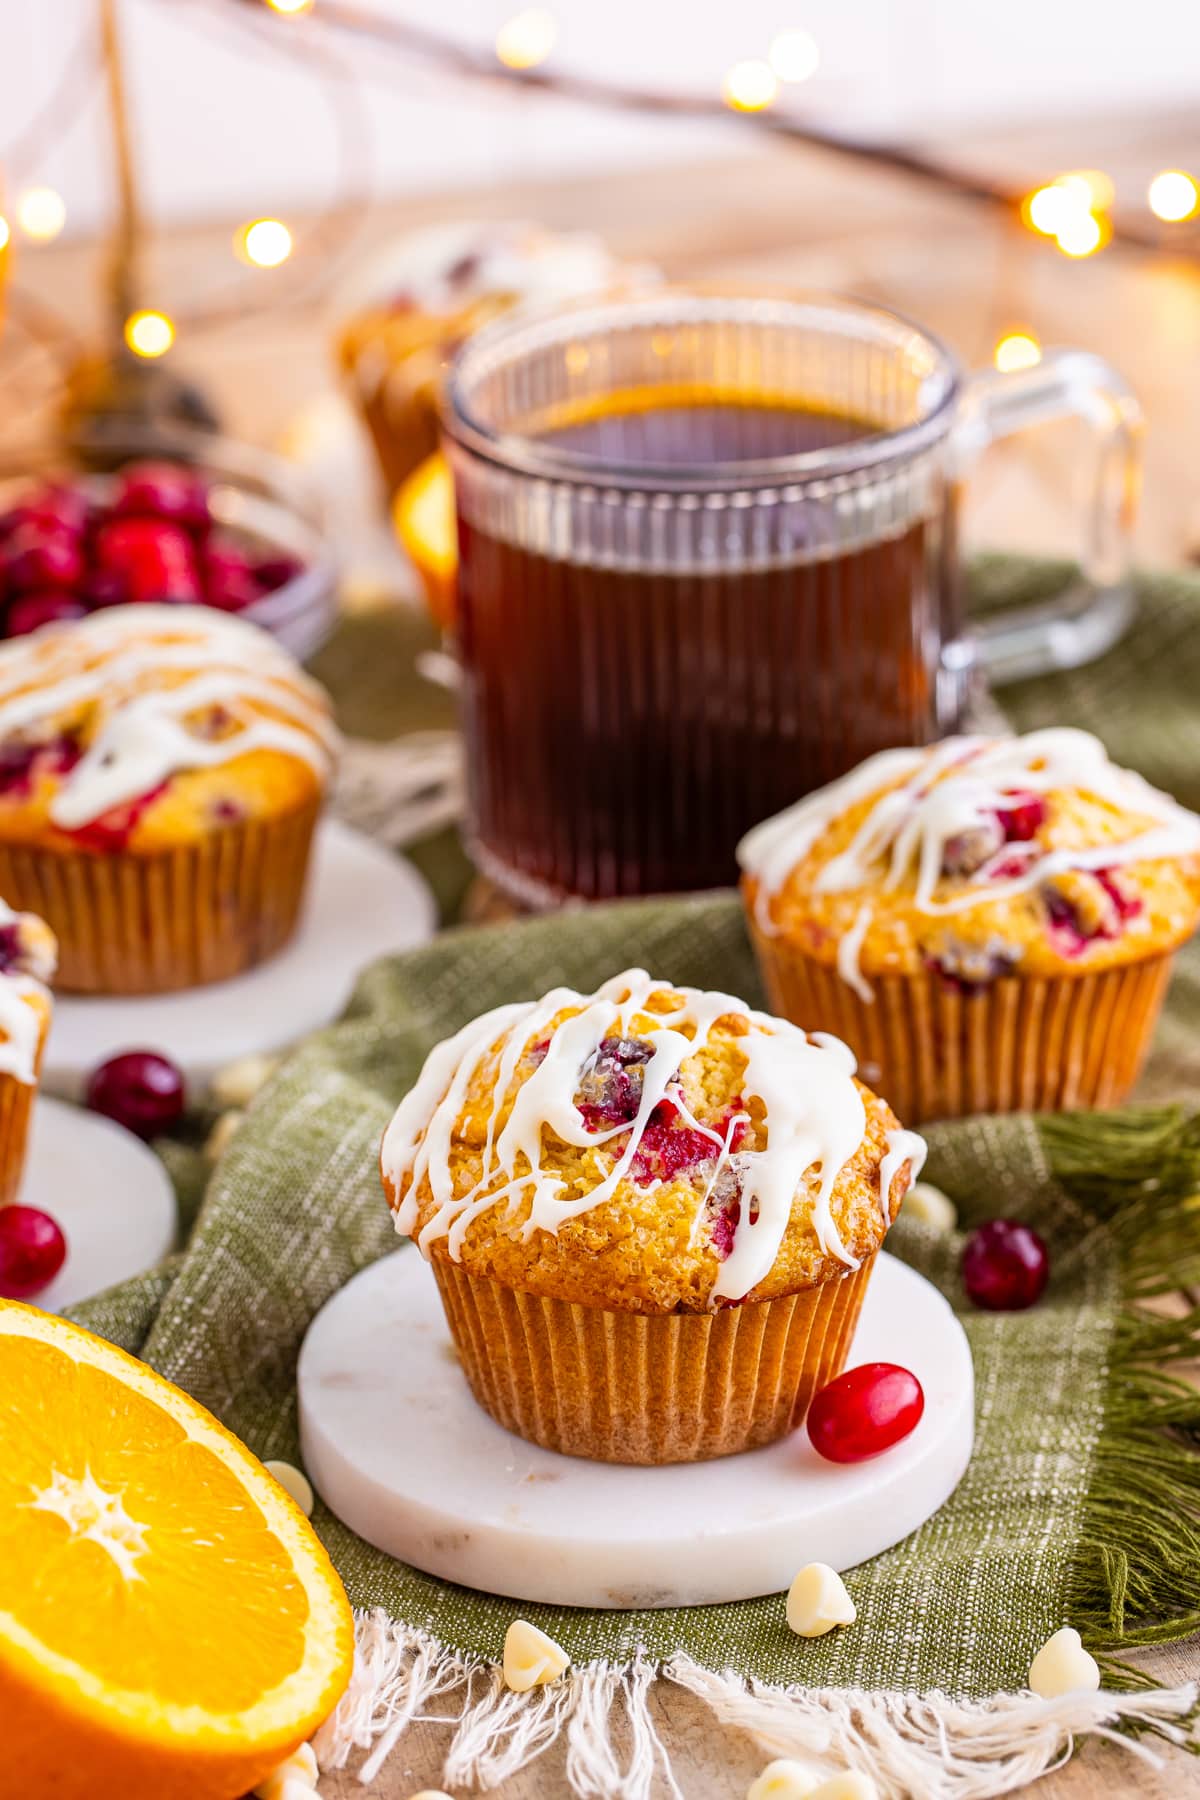 Muffins served with hot tea.